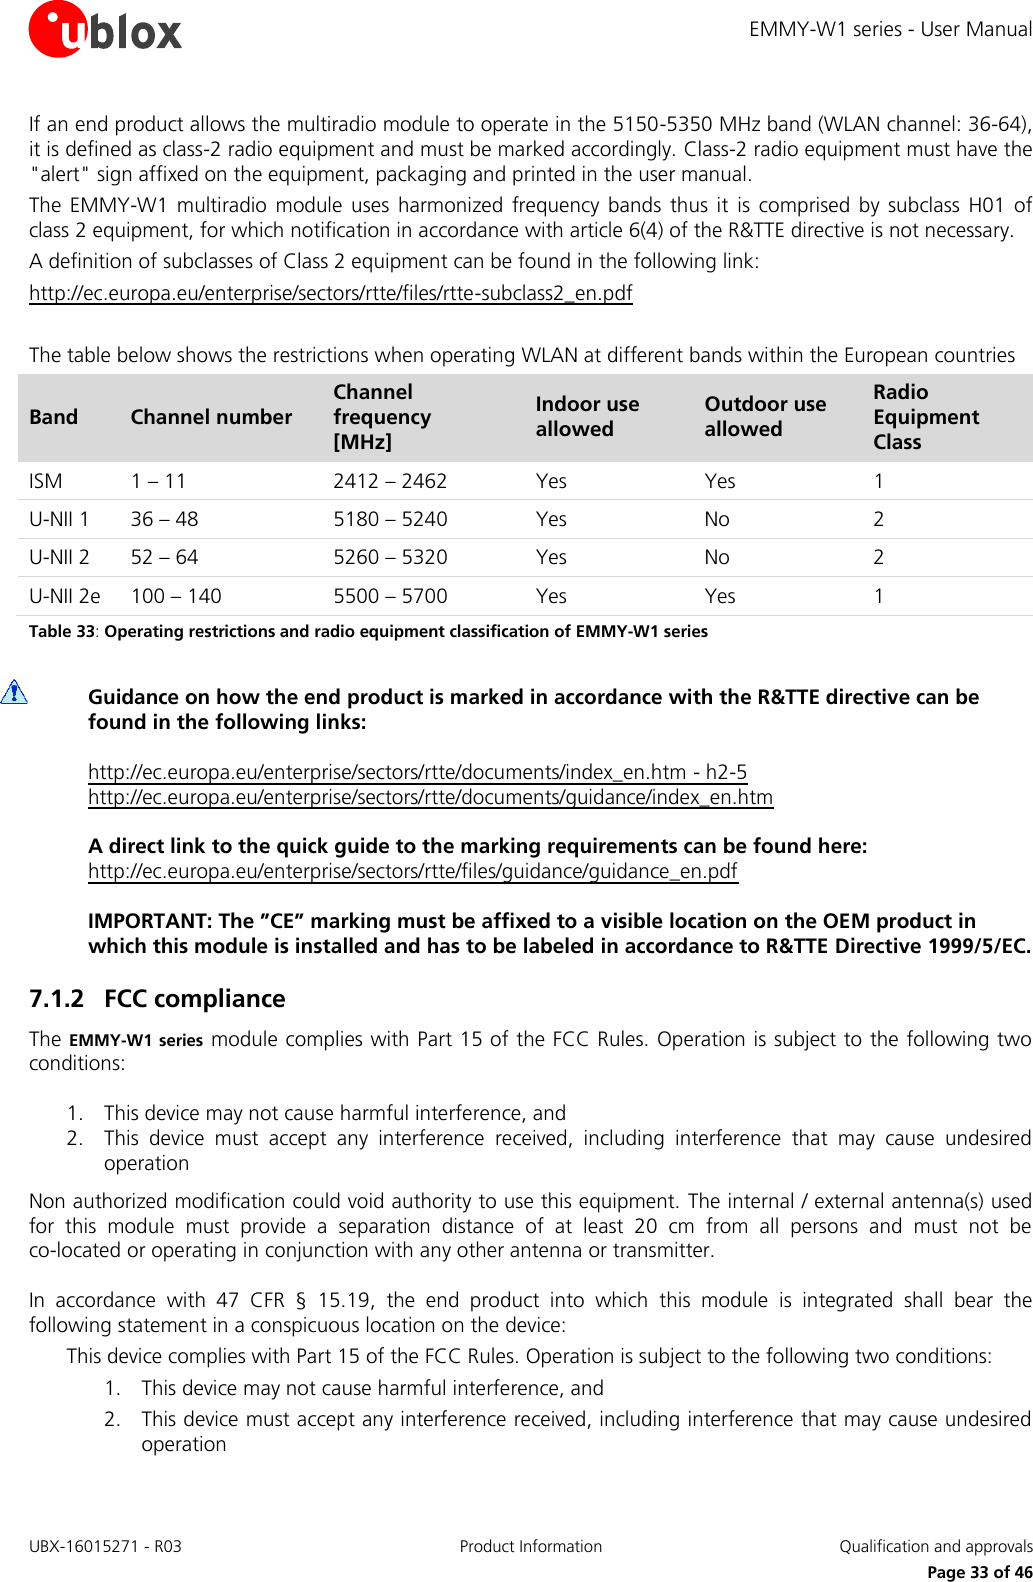 EMMY-W1 series - User Manual UBX-16015271 - R03 Product Information  Qualification and approvals     Page 33 of 46 If an end product allows the multiradio module to operate in the 5150-5350 MHz band (WLAN channel: 36-64), it is defined as class-2 radio equipment and must be marked accordingly. Class-2 radio equipment must have the &quot;alert&quot; sign affixed on the equipment, packaging and printed in the user manual.  The  EMMY-W1  multiradio  module  uses  harmonized  frequency  bands  thus  it  is  comprised  by  subclass  H01  of class 2 equipment, for which notification in accordance with article 6(4) of the R&amp;TTE directive is not necessary. A definition of subclasses of Class 2 equipment can be found in the following link: http://ec.europa.eu/enterprise/sectors/rtte/files/rtte-subclass2_en.pdf  The table below shows the restrictions when operating WLAN at different bands within the European countries Band Channel number Channel frequency [MHz] Indoor use allowed Outdoor use allowed Radio Equipment Class ISM 1 – 11  2412 – 2462  Yes Yes 1 U-NII 1 36 – 48  5180 – 5240  Yes No 2 U-NII 2 52 – 64  5260 – 5320  Yes No 2 U-NII 2e 100 – 140  5500 – 5700  Yes Yes 1 Table 33: Operating restrictions and radio equipment classification of EMMY-W1 series   Guidance on how the end product is marked in accordance with the R&amp;TTE directive can be found in the following links:  http://ec.europa.eu/enterprise/sectors/rtte/documents/index_en.htm - h2-5  http://ec.europa.eu/enterprise/sectors/rtte/documents/guidance/index_en.htm   A direct link to the quick guide to the marking requirements can be found here:  http://ec.europa.eu/enterprise/sectors/rtte/files/guidance/guidance_en.pdf  IMPORTANT: The ”CE” marking must be affixed to a visible location on the OEM product in which this module is installed and has to be labeled in accordance to R&amp;TTE Directive 1999/5/EC. 7.1.2 FCC compliance  The EMMY-W1 series module complies with Part 15 of the FCC Rules. Operation is subject to the following two conditions: 1. This device may not cause harmful interference, and 2. This  device  must  accept  any  interference  received,  including  interference  that  may  cause  undesired operation Non authorized modification could void authority to use this equipment. The internal / external antenna(s) used for  this  module  must  provide  a  separation  distance  of  at  least  20  cm  from  all  persons  and  must  not  be  co-located or operating in conjunction with any other antenna or transmitter. In  accordance  with  47  CFR  §  15.19,  the  end  product  into  which  this  module  is  integrated  shall  bear  the following statement in a conspicuous location on the device: This device complies with Part 15 of the FCC Rules. Operation is subject to the following two conditions: 1. This device may not cause harmful interference, and 2. This device must accept any interference received, including interference that may cause undesired operation 